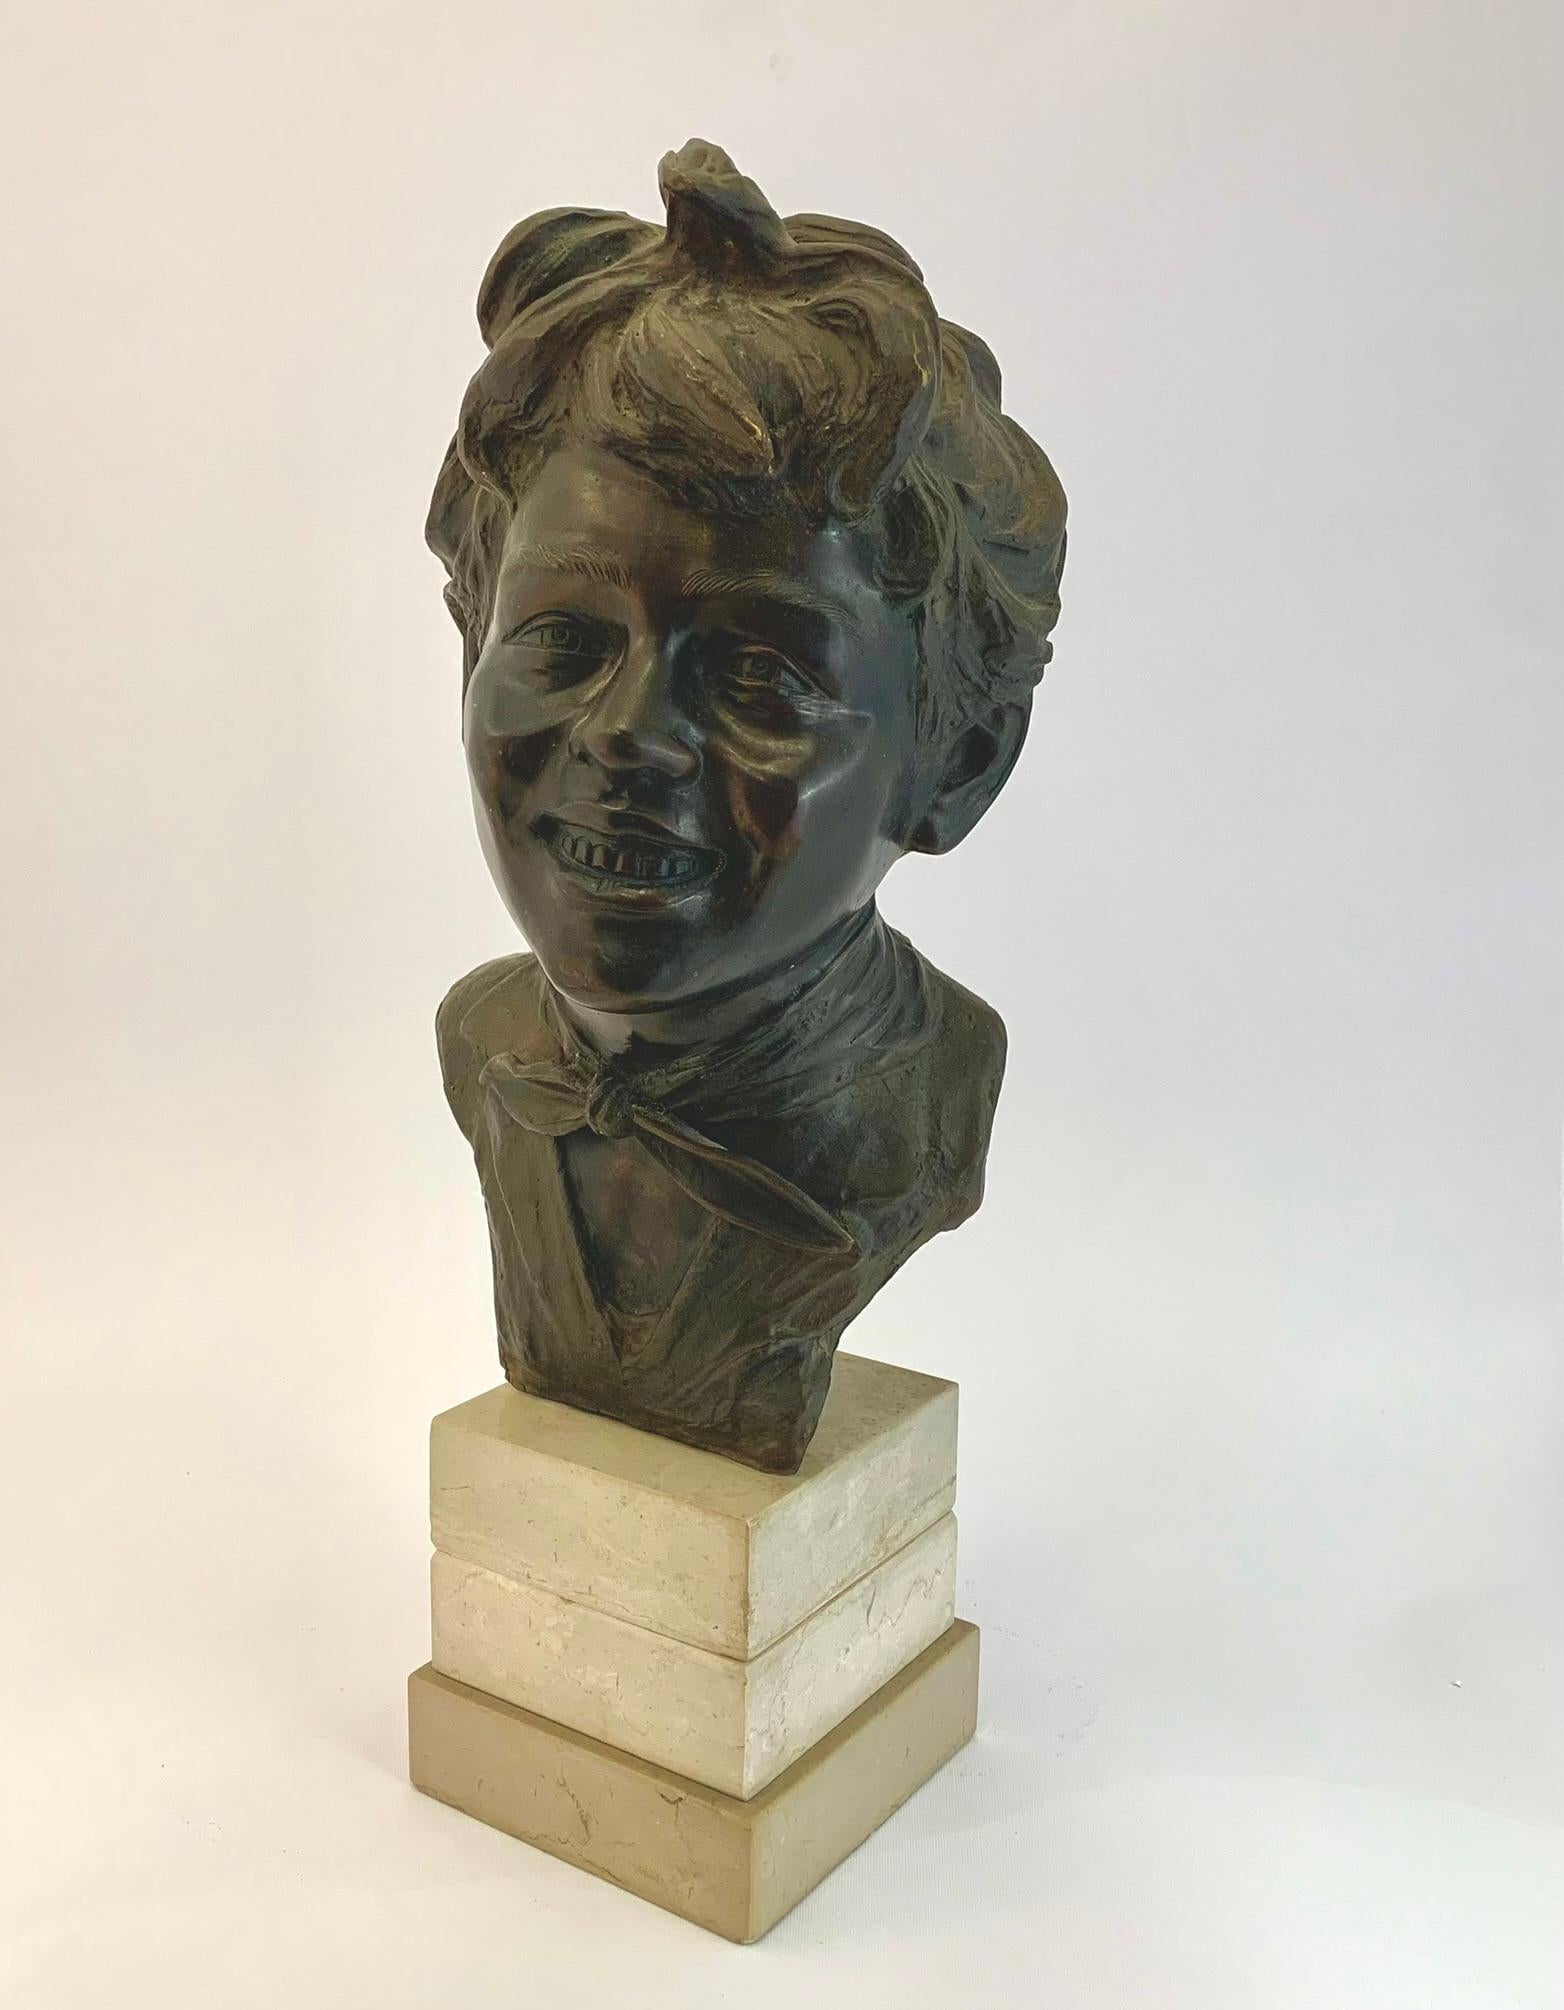 Beautiful lost wax cast bronze sculpture on a white marble base. It is signed by V. Cinque (1852-1929), part of the Neapolitan school of the early 1900s.

It depicts the classic Neapolitan street child.